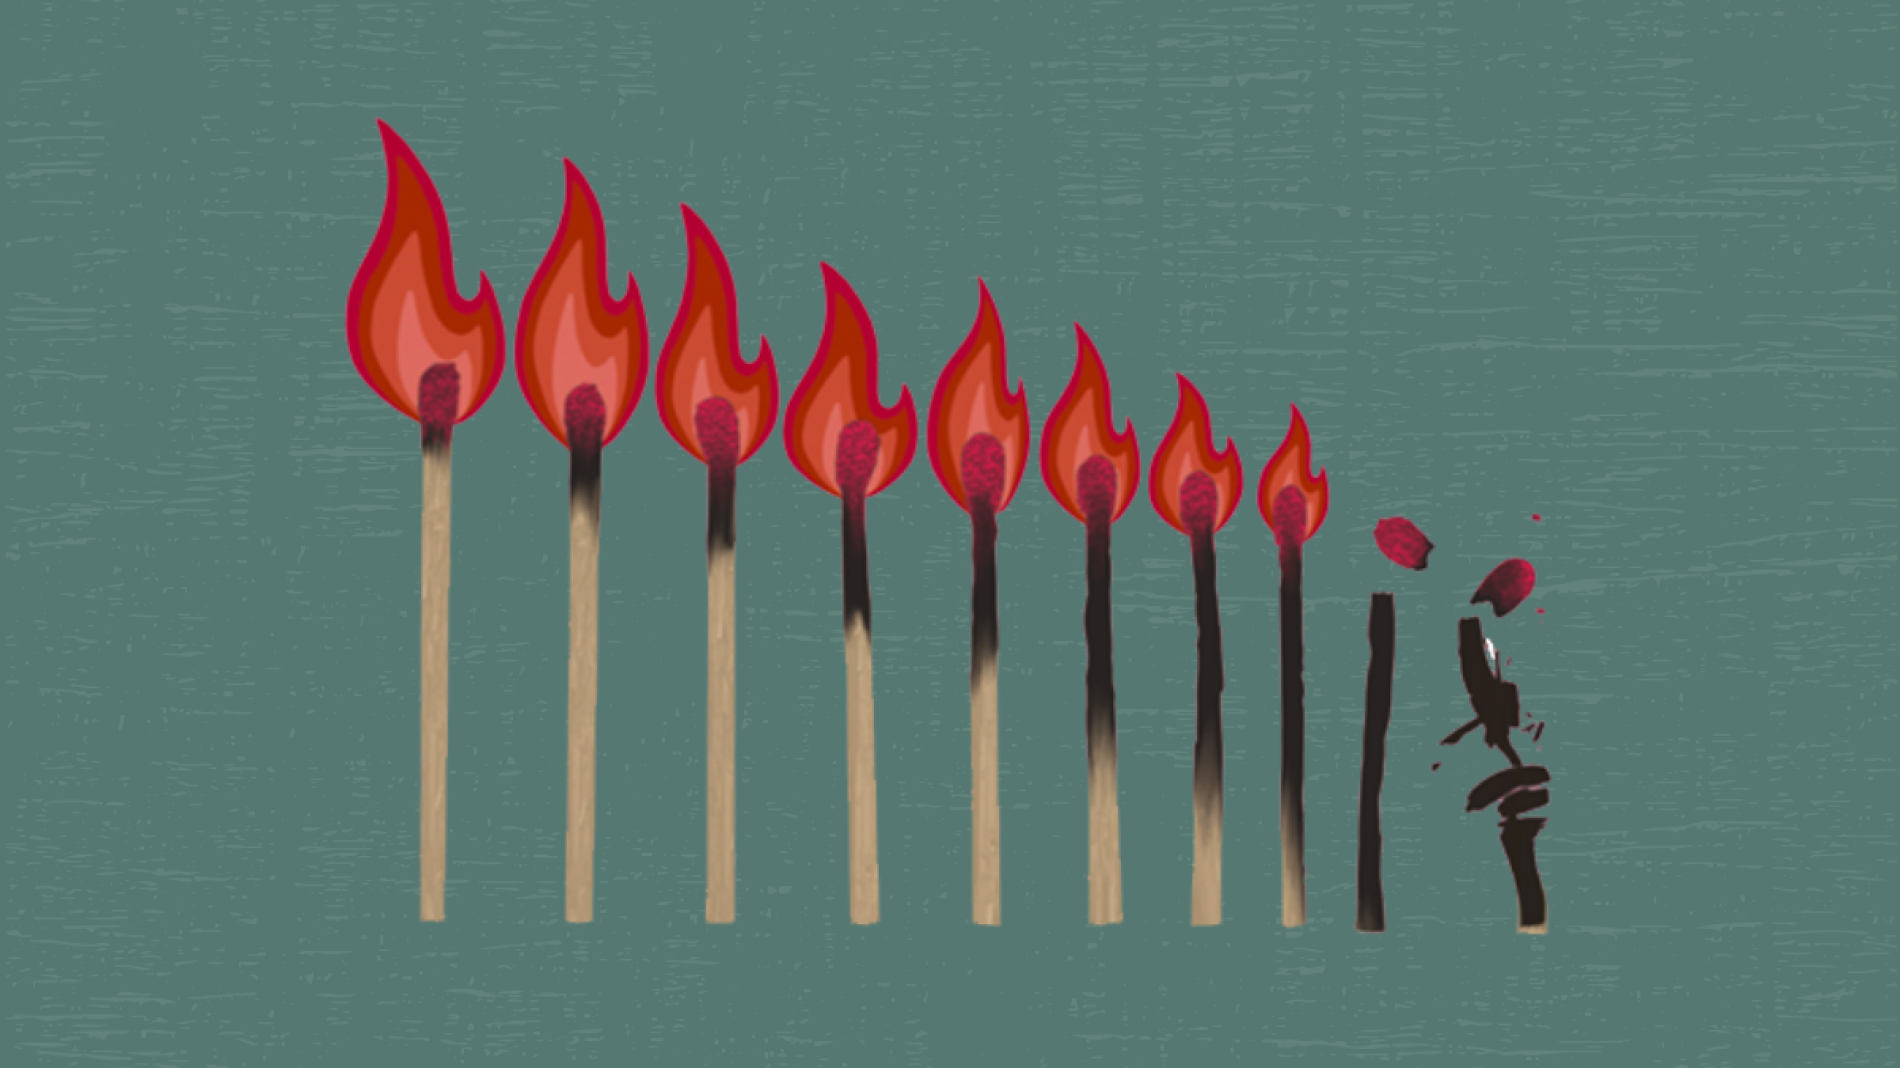 Illustration of a series of matches, with each flame getting smaller until the final match is broken